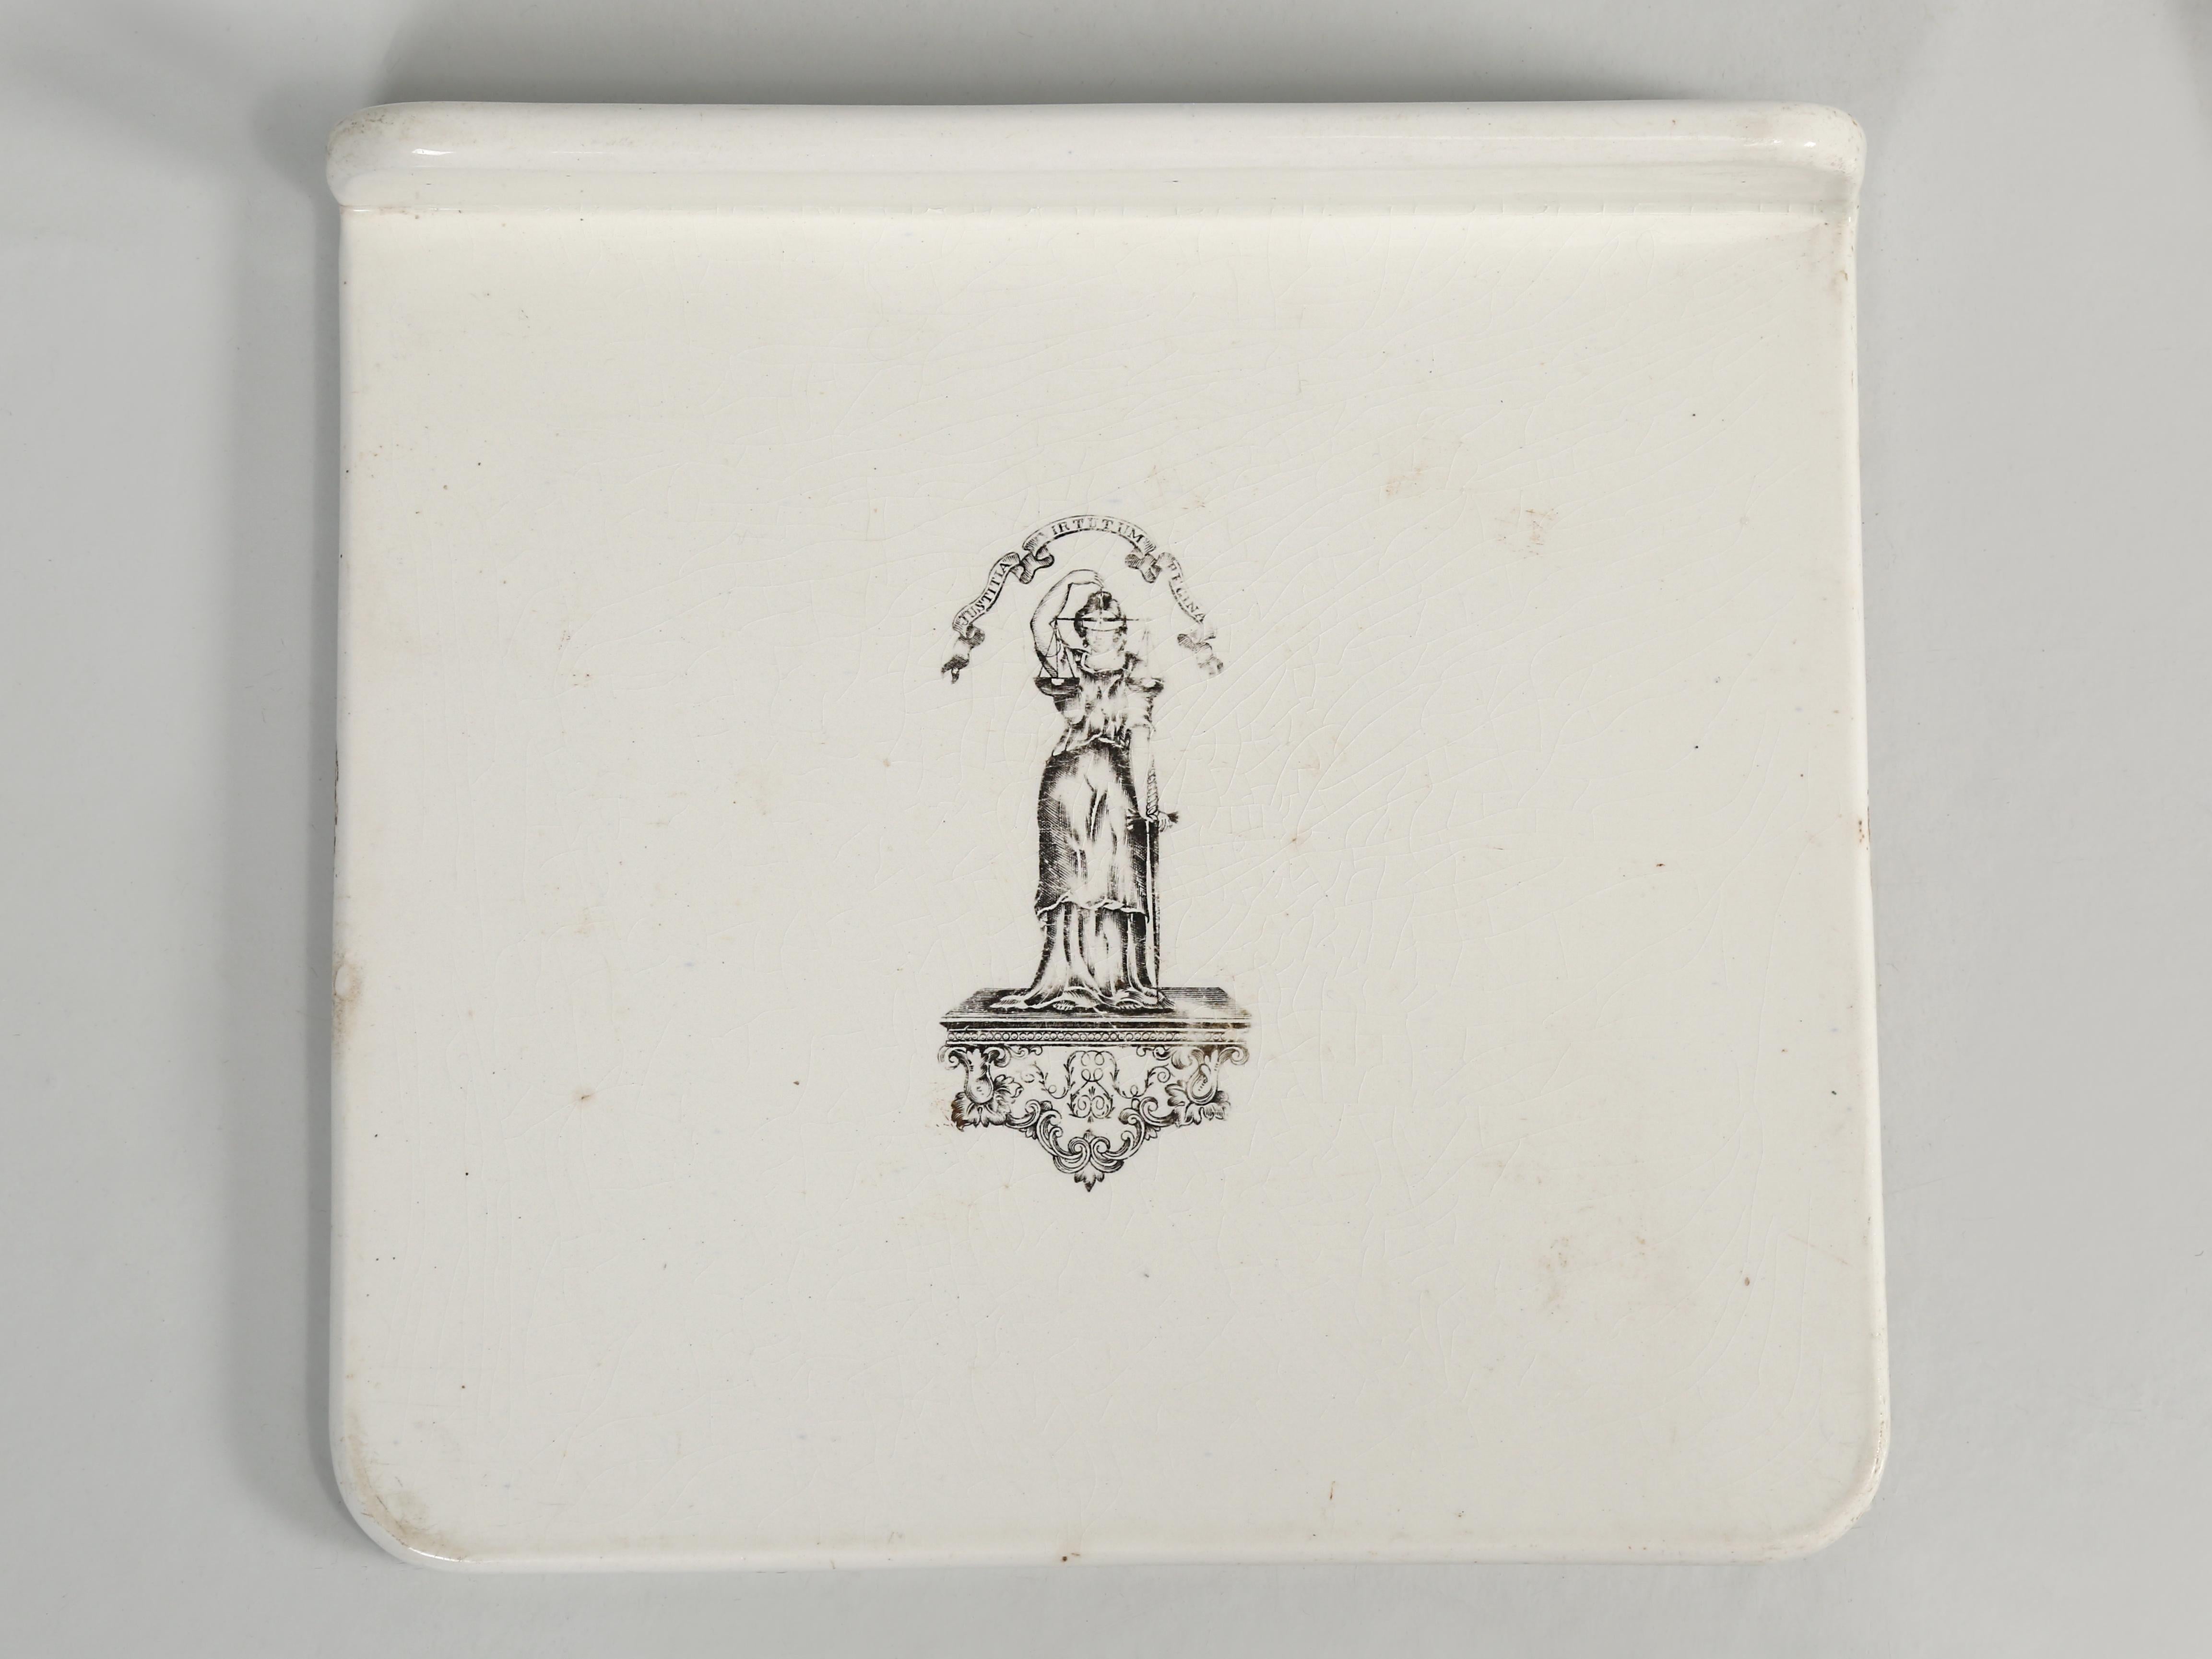 A wonderful and quite rare collection of antique English white ironstone scale plates, featuring advertising logos from the 1800s to early 1900s. Assuming, you are not going to be using these decorative scale plates on an actual scale, they do make